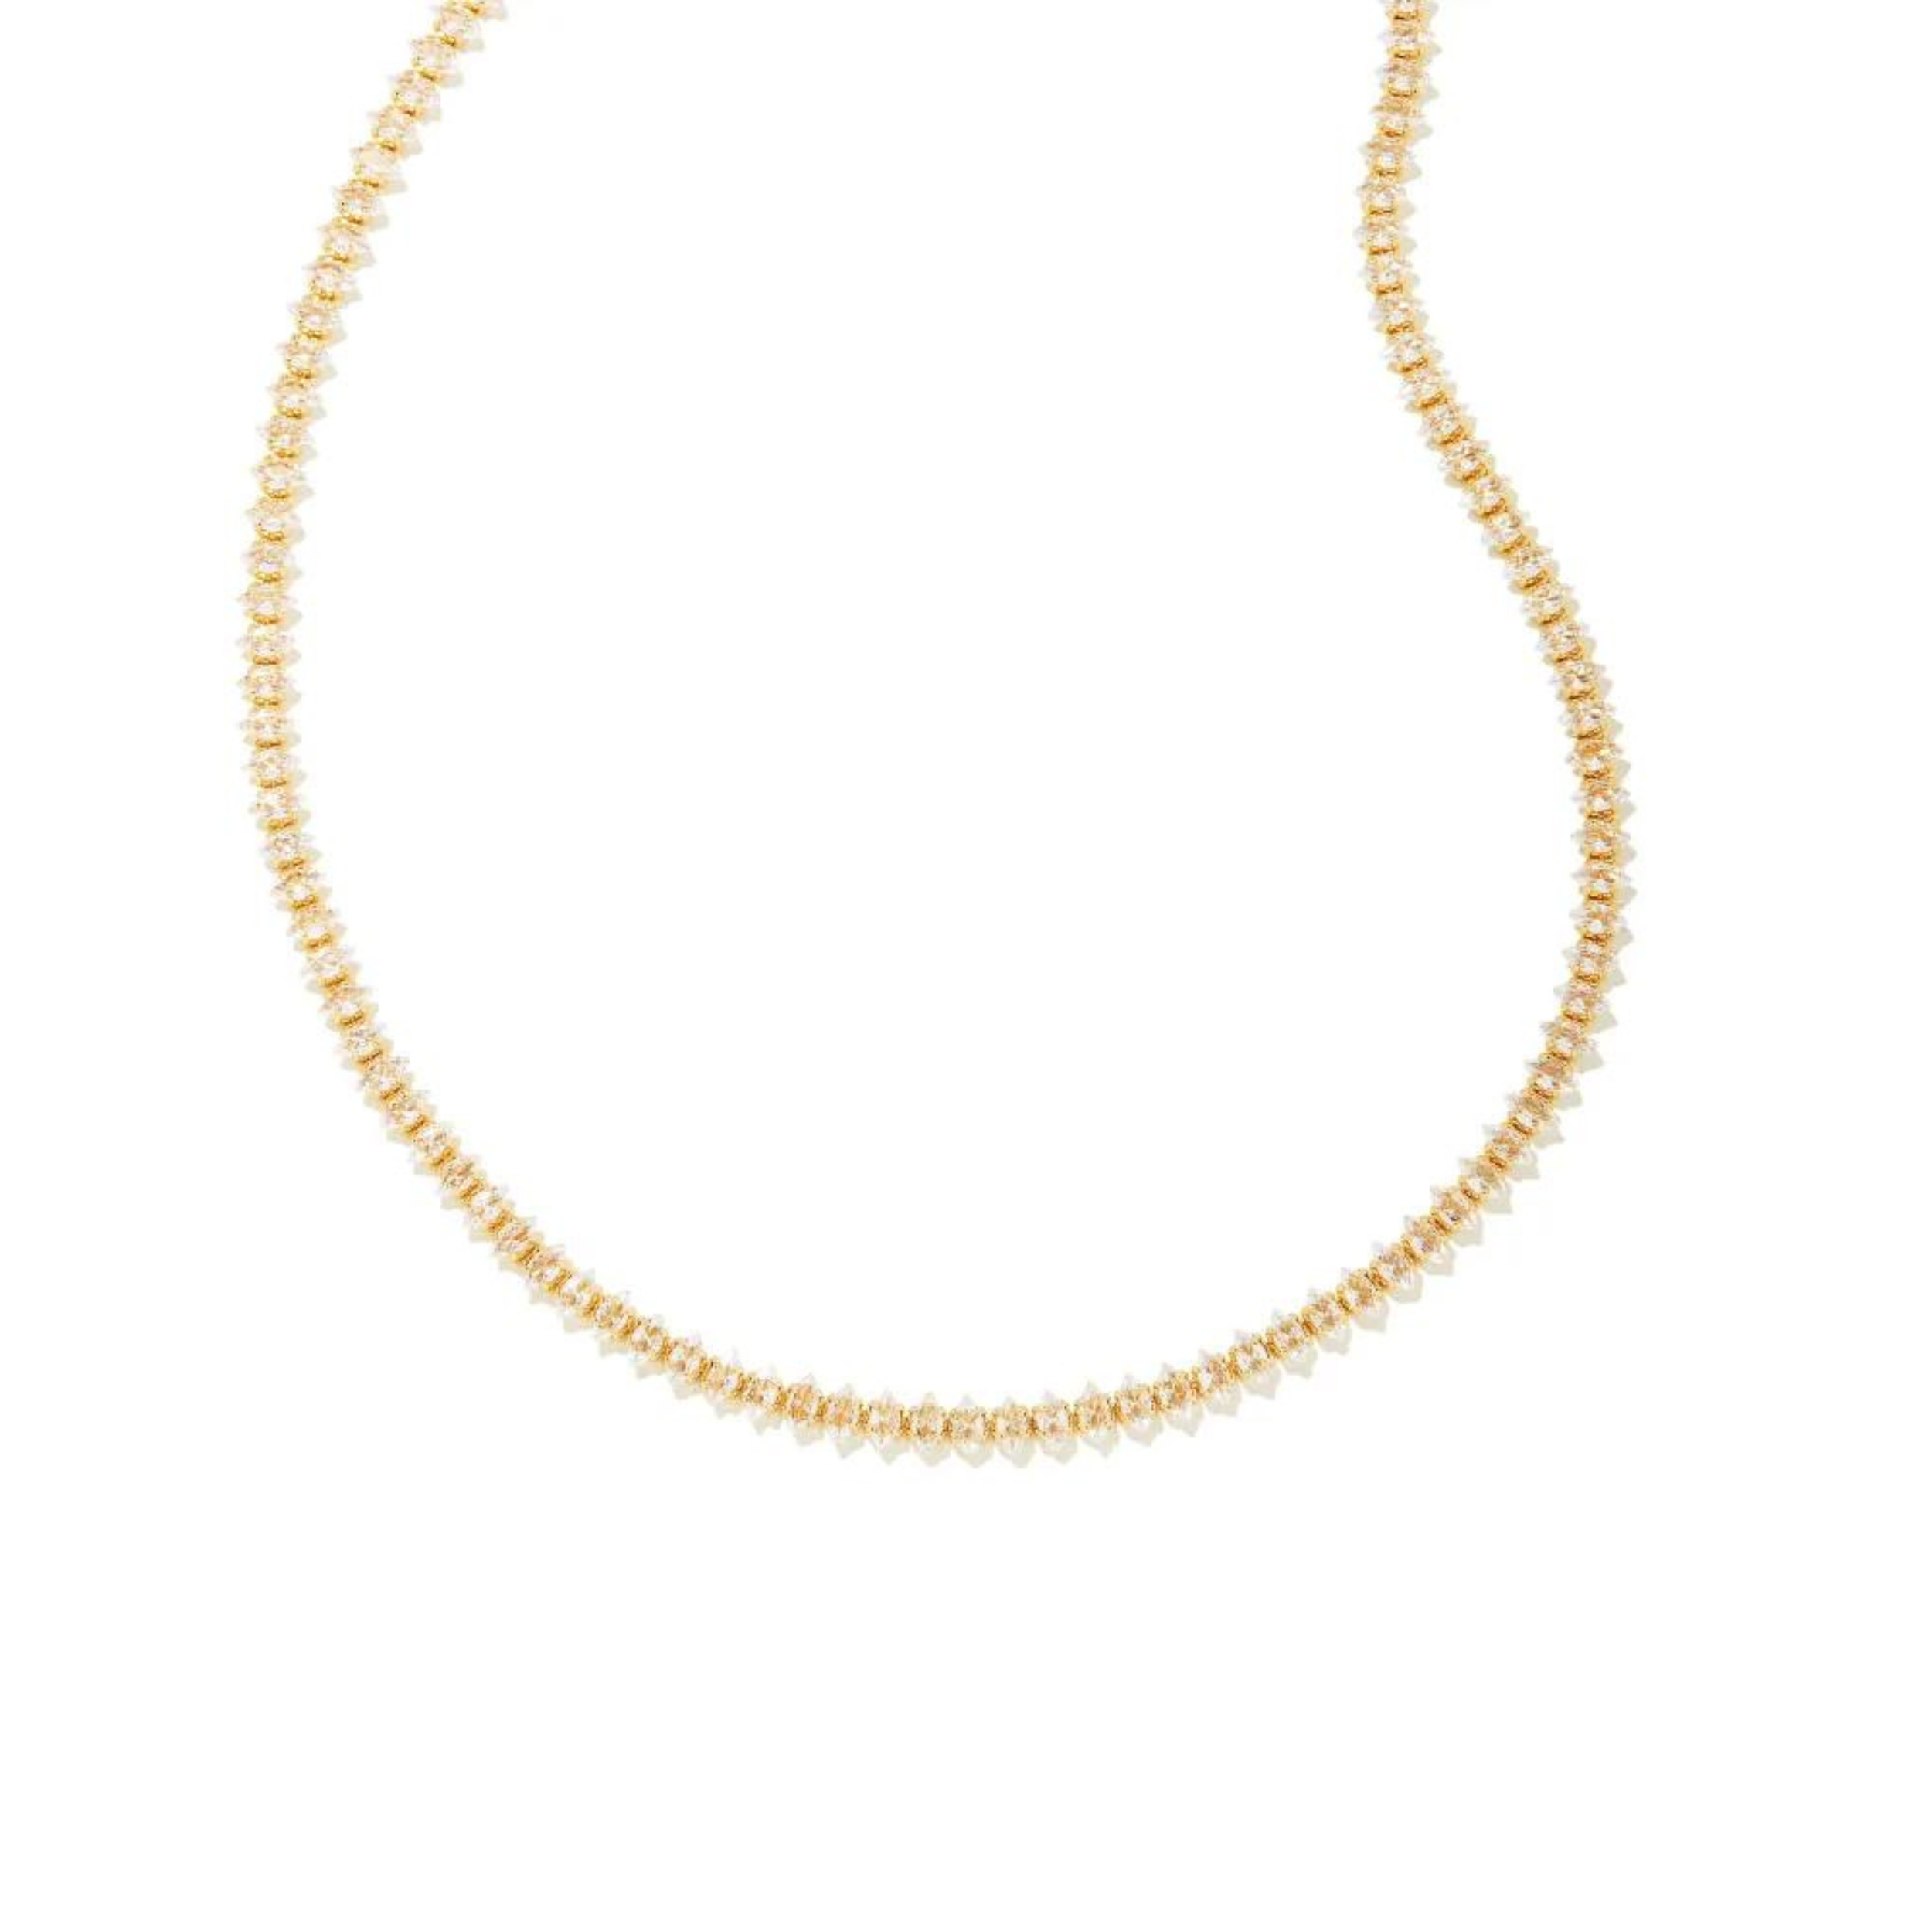 Pictured is a clear crystal tennis necklace in gold on a white background.